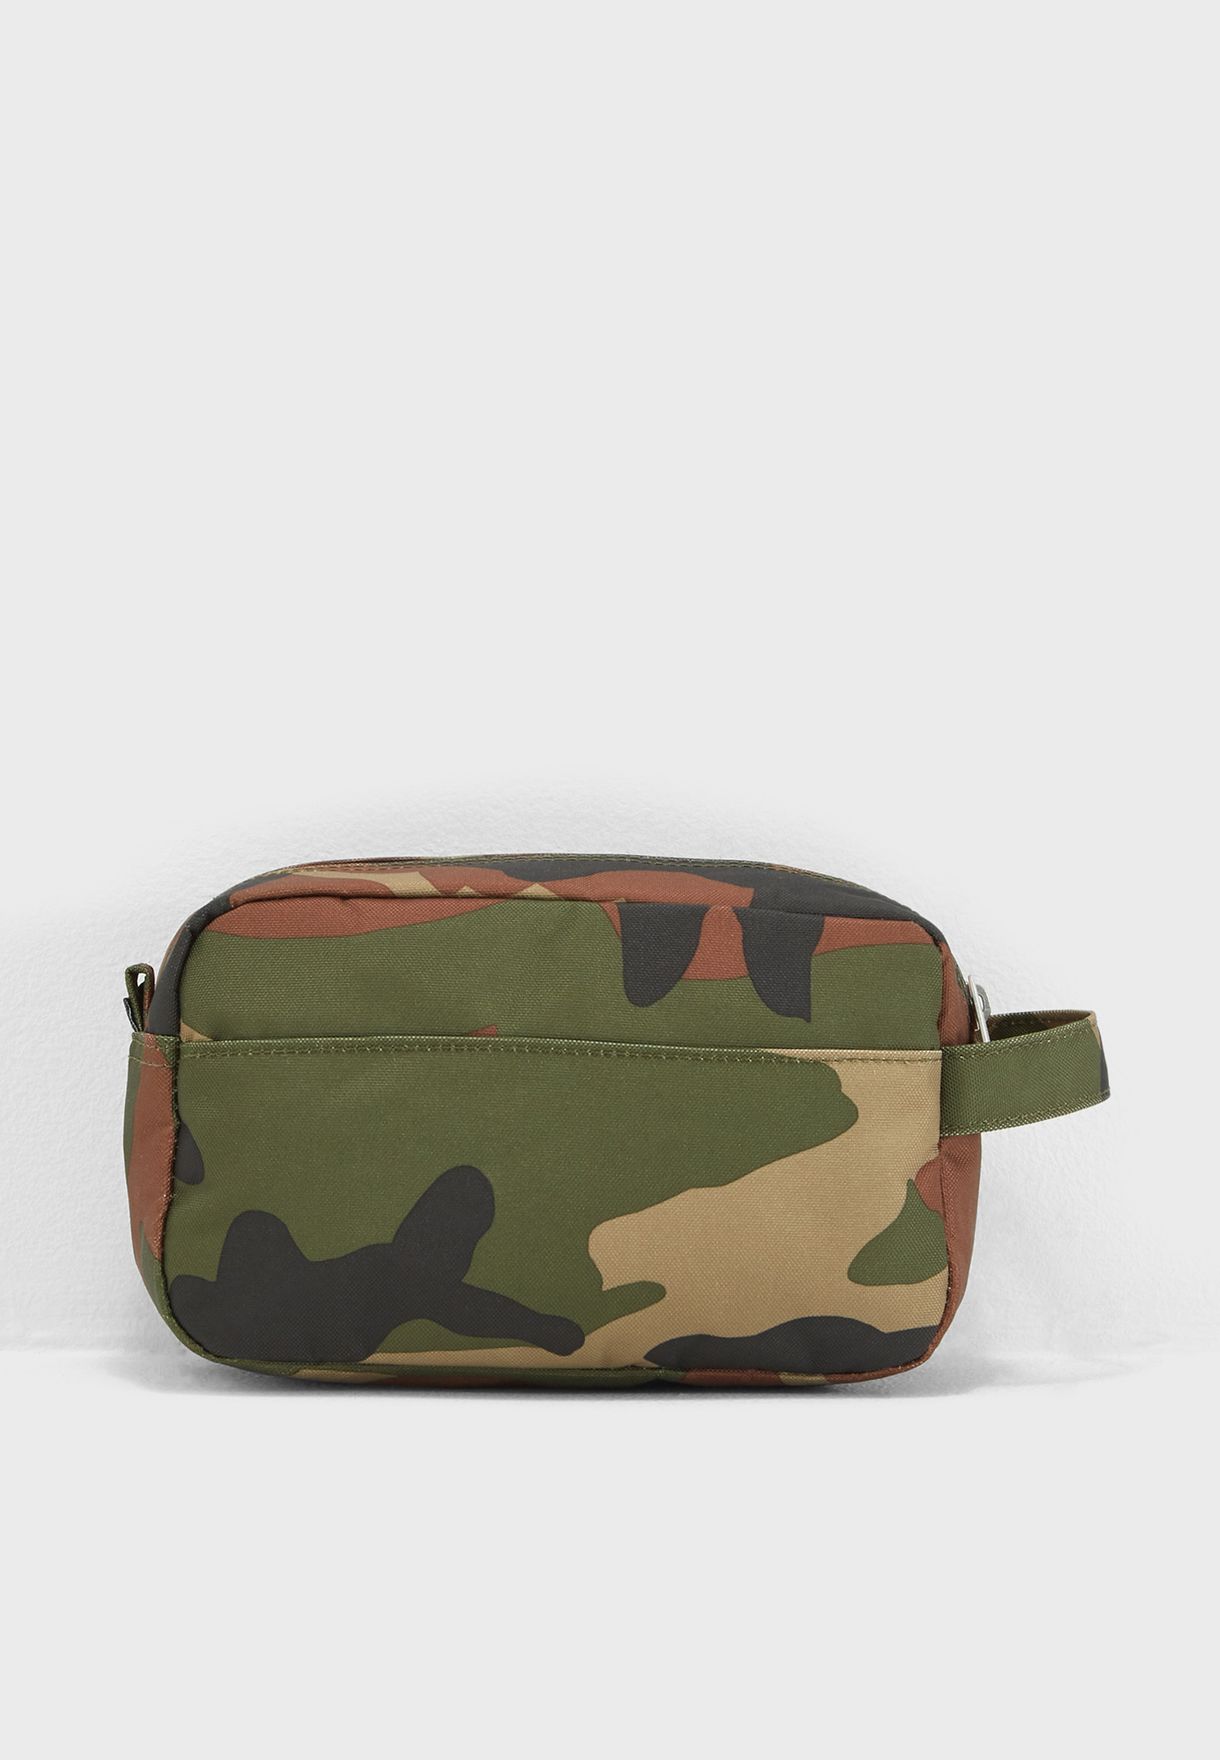 Chapter Carry On Travel Bag